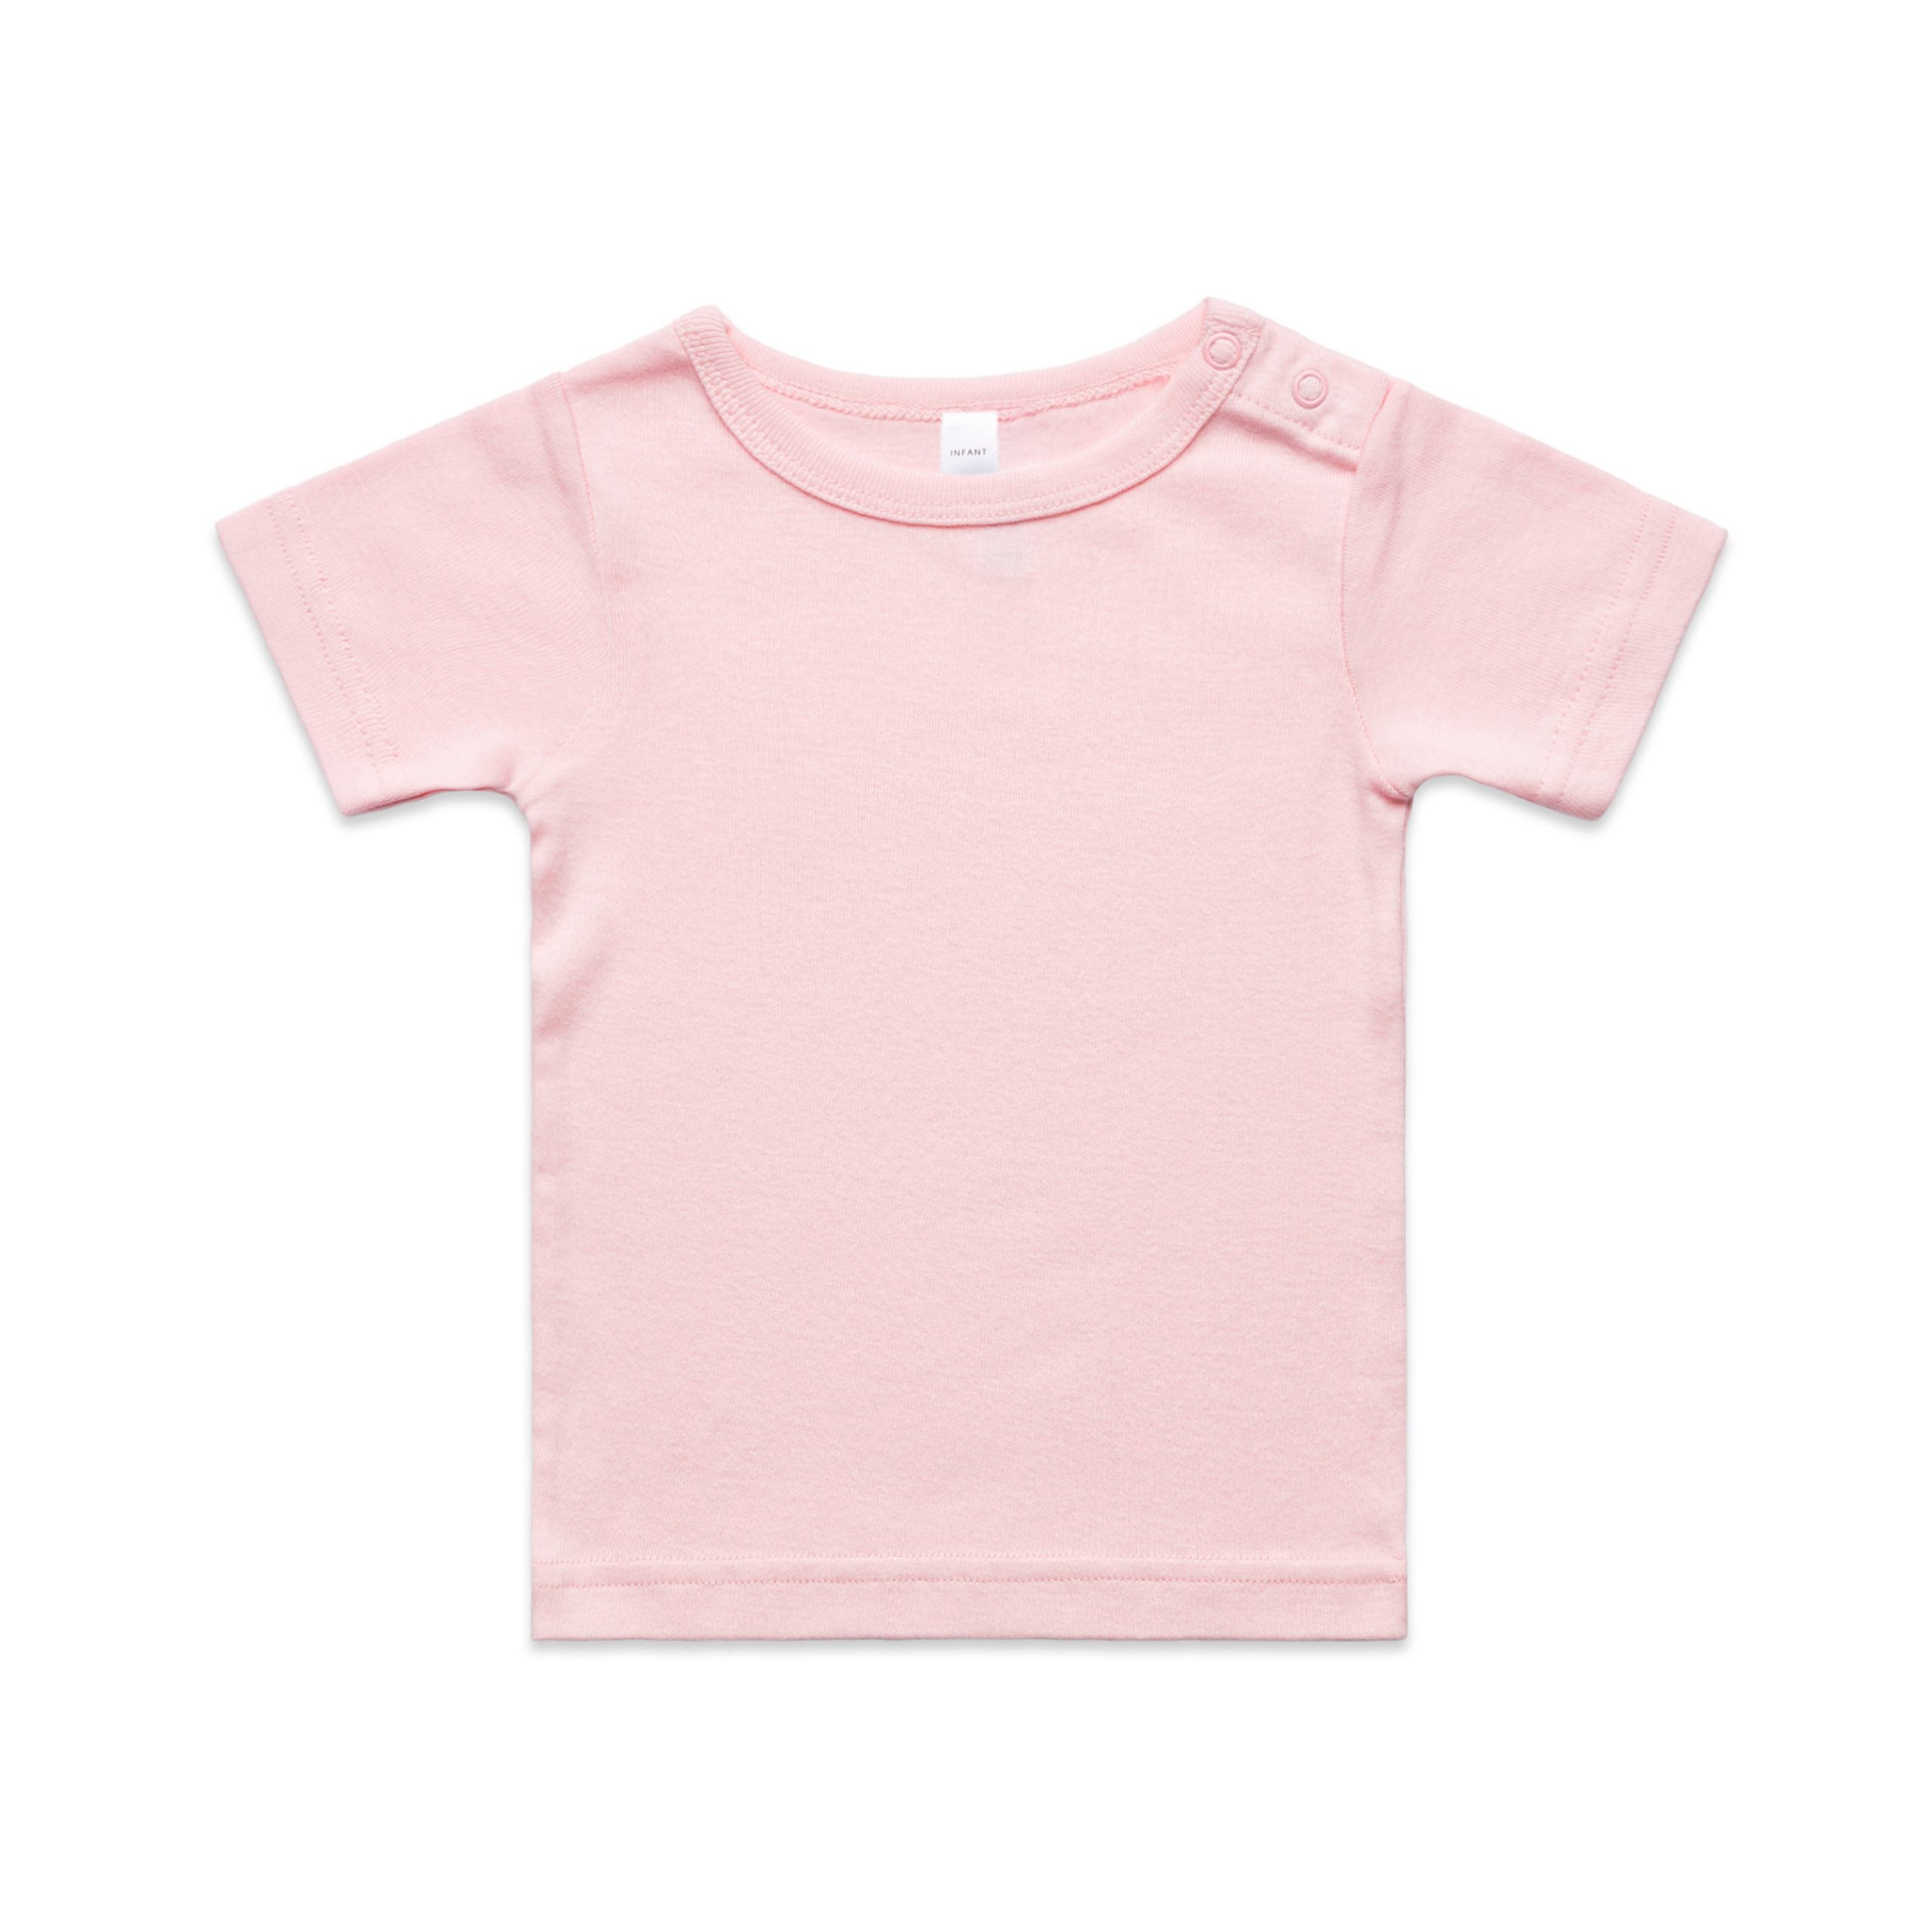 3001_AS_Infant-Wee-Tee_Pink-scaled